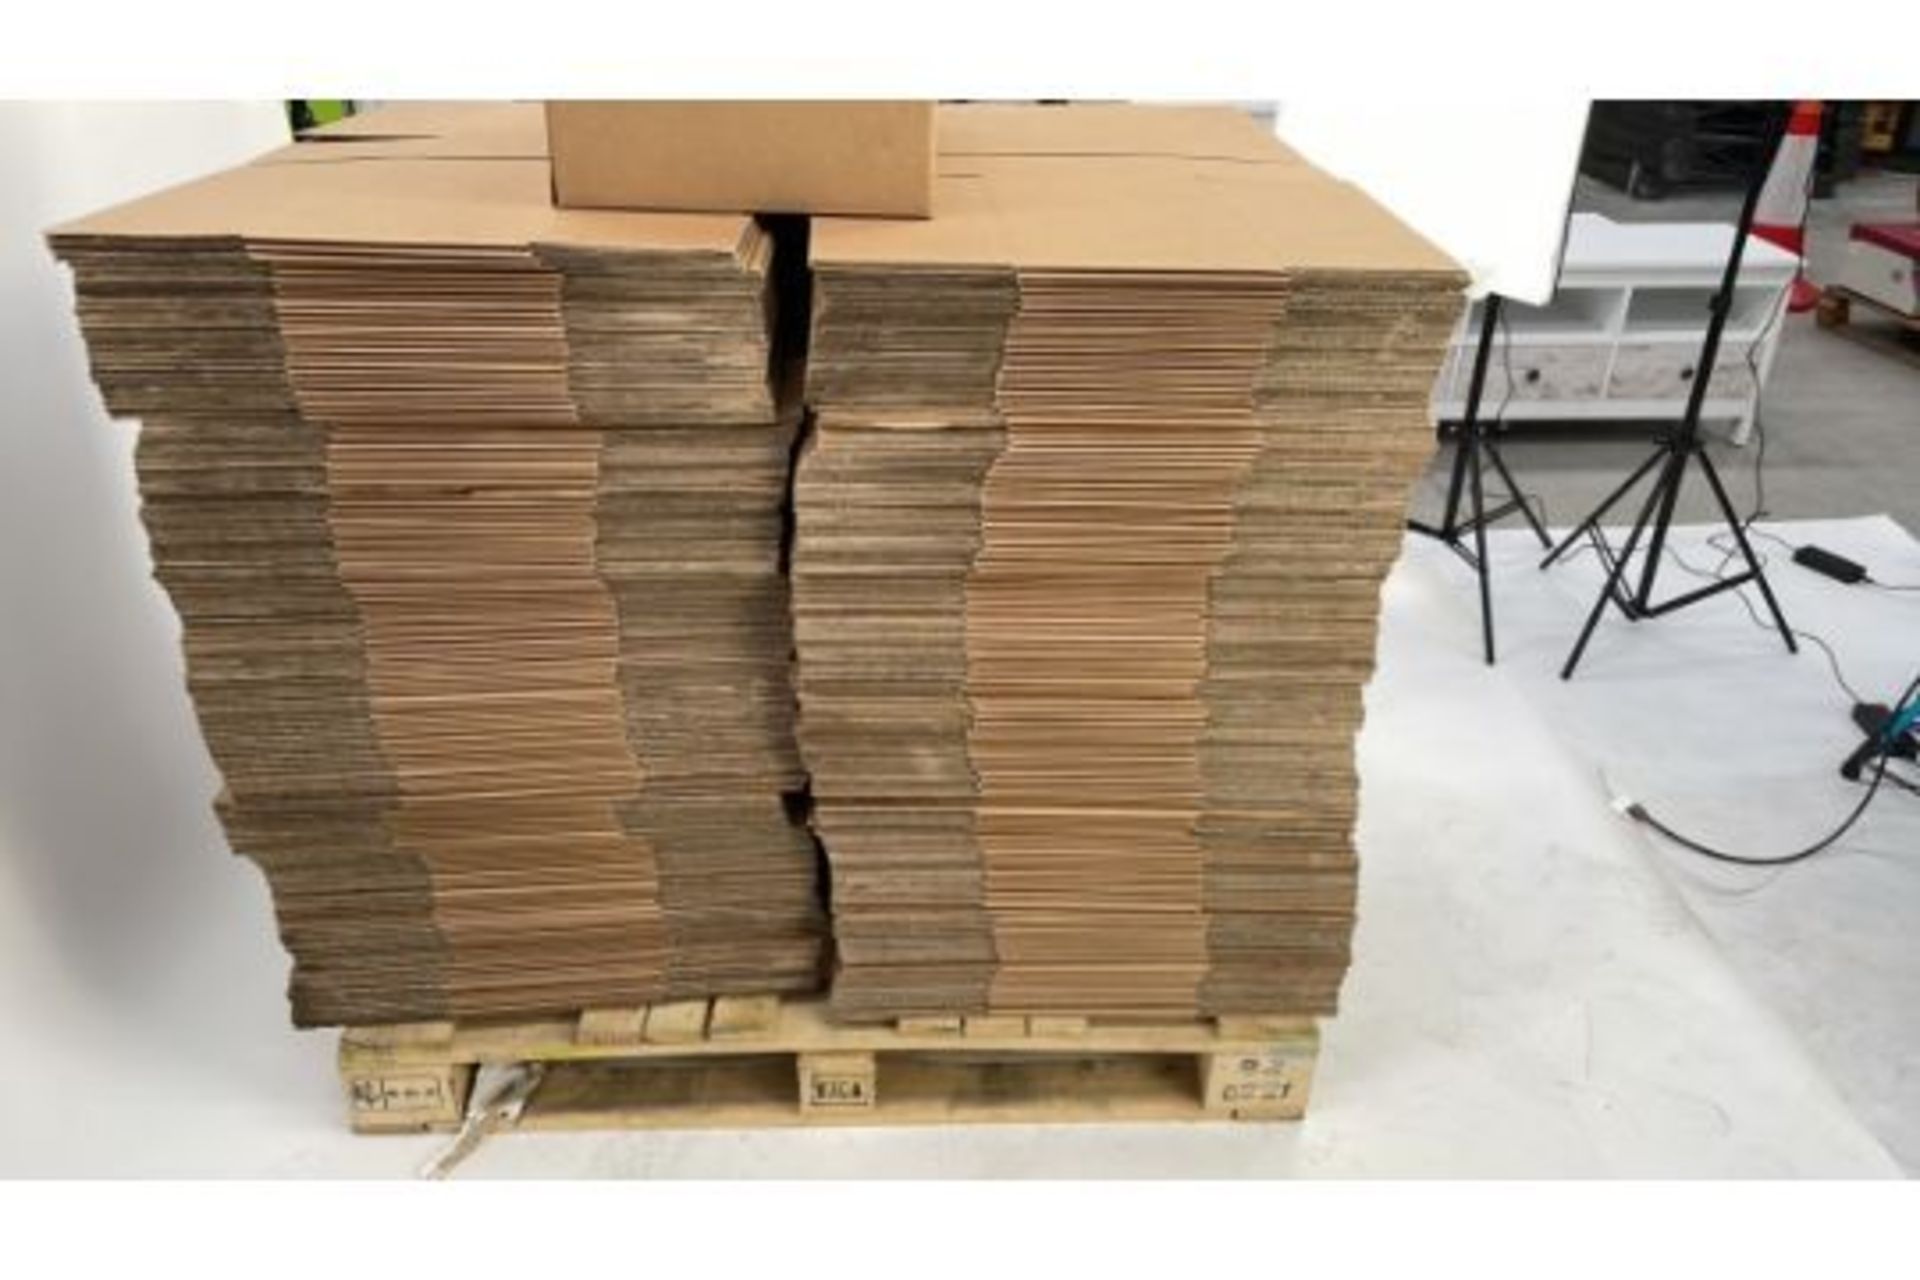 Pallet Of Cardboard Boxes - Image 5 of 5